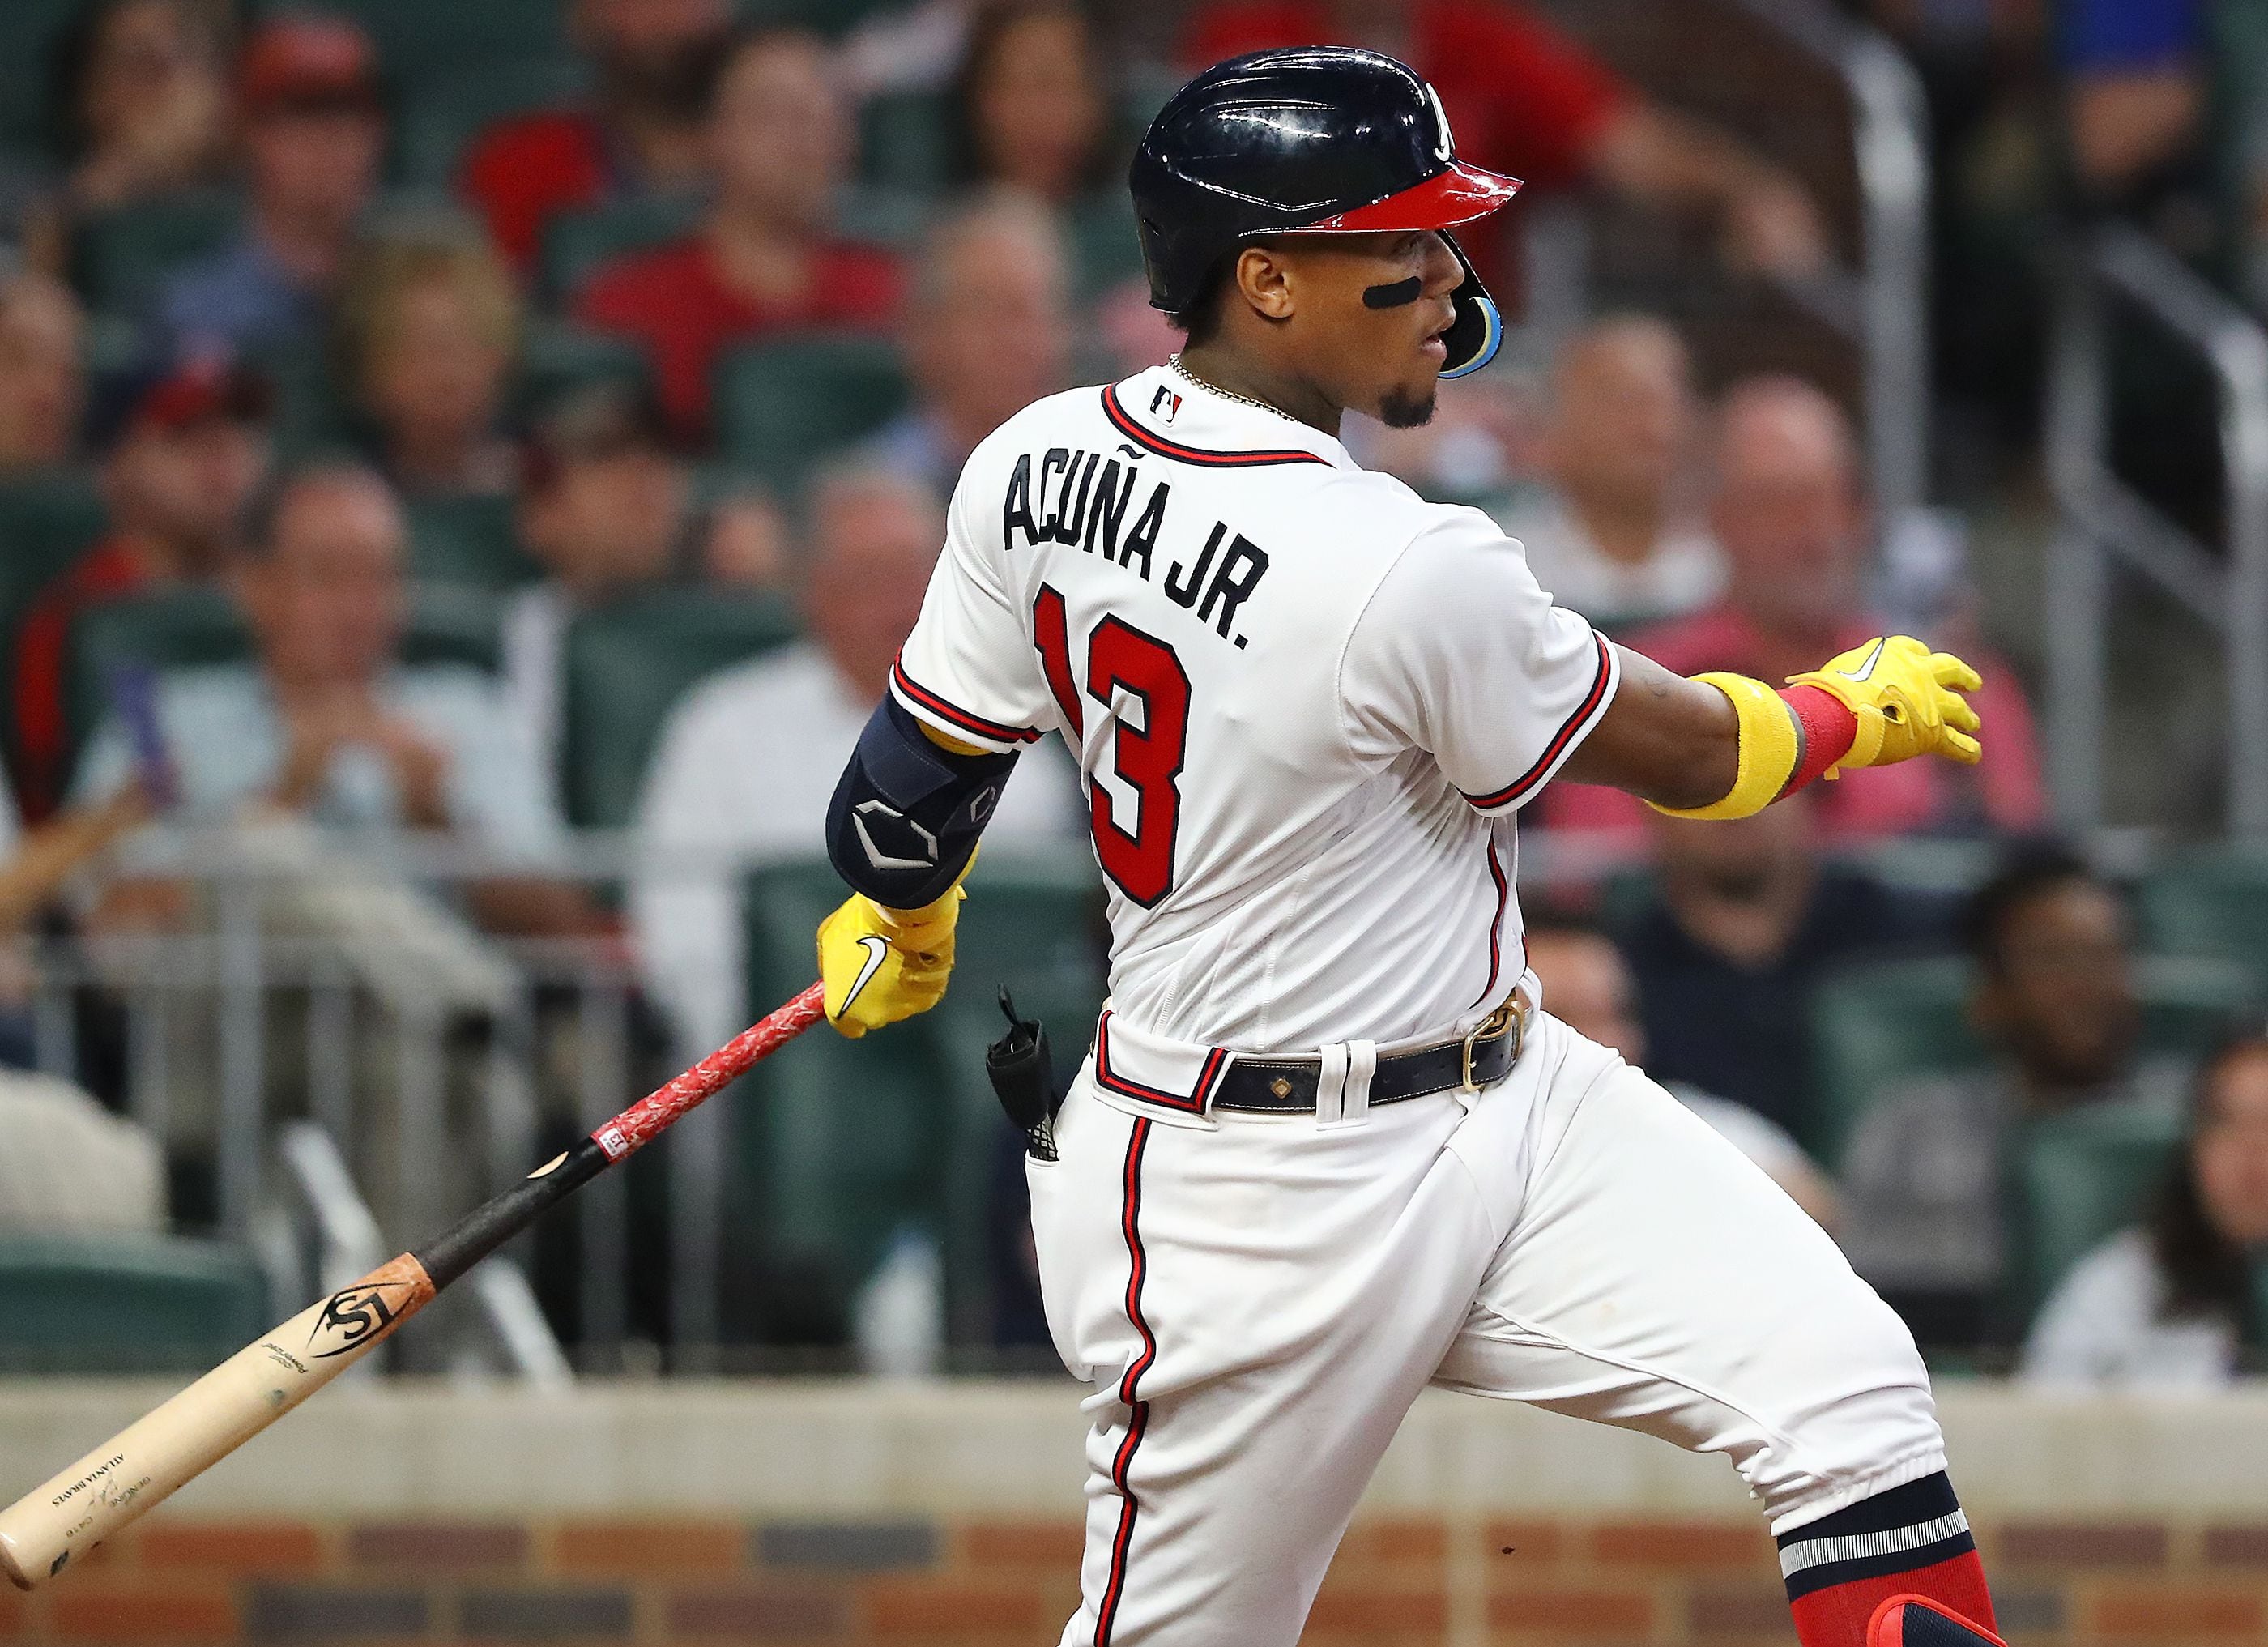 Braves' Ronald Acuña Jr. joins exclusive 40-40 club with 40th home